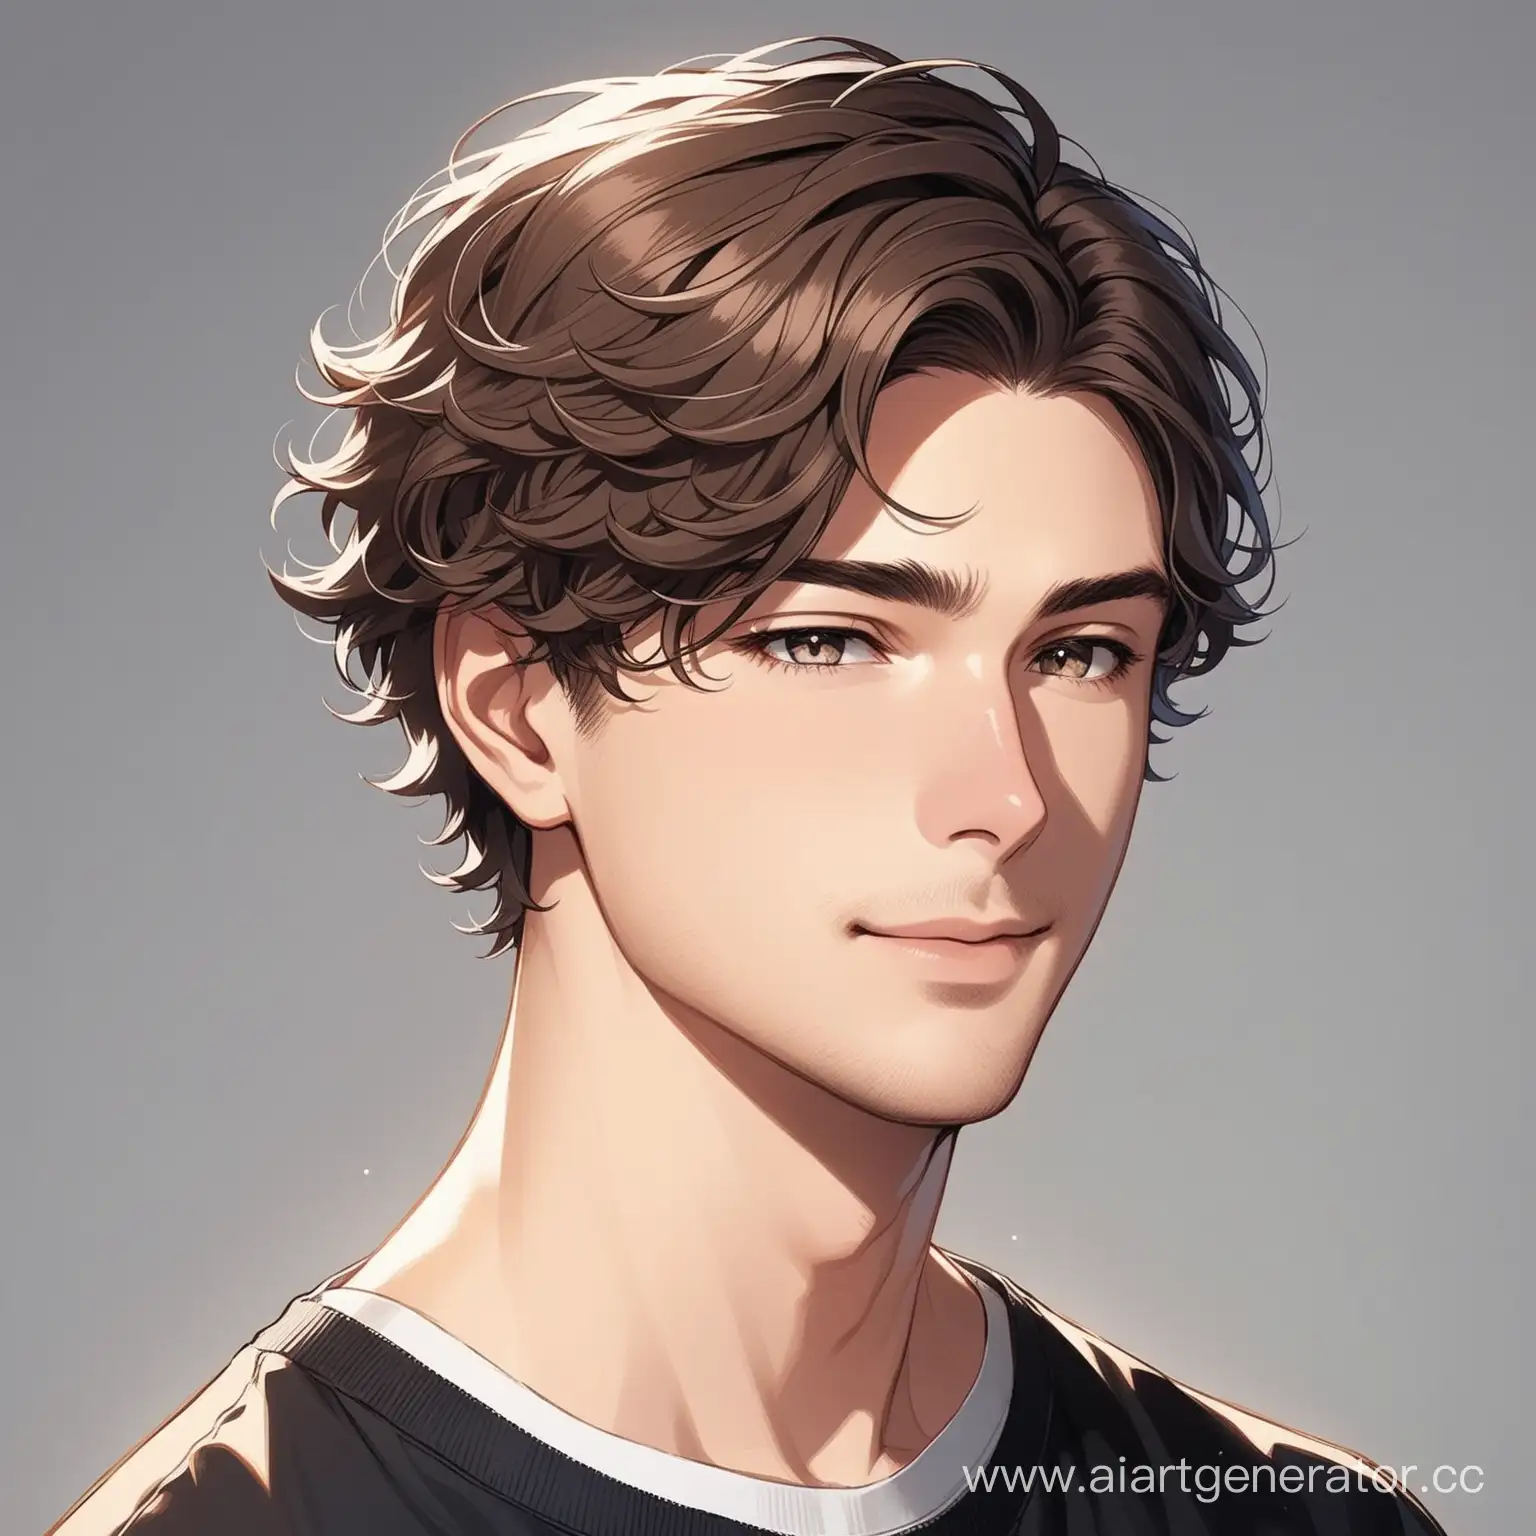 Portrait-of-a-Young-Man-with-Short-Wavy-Hair